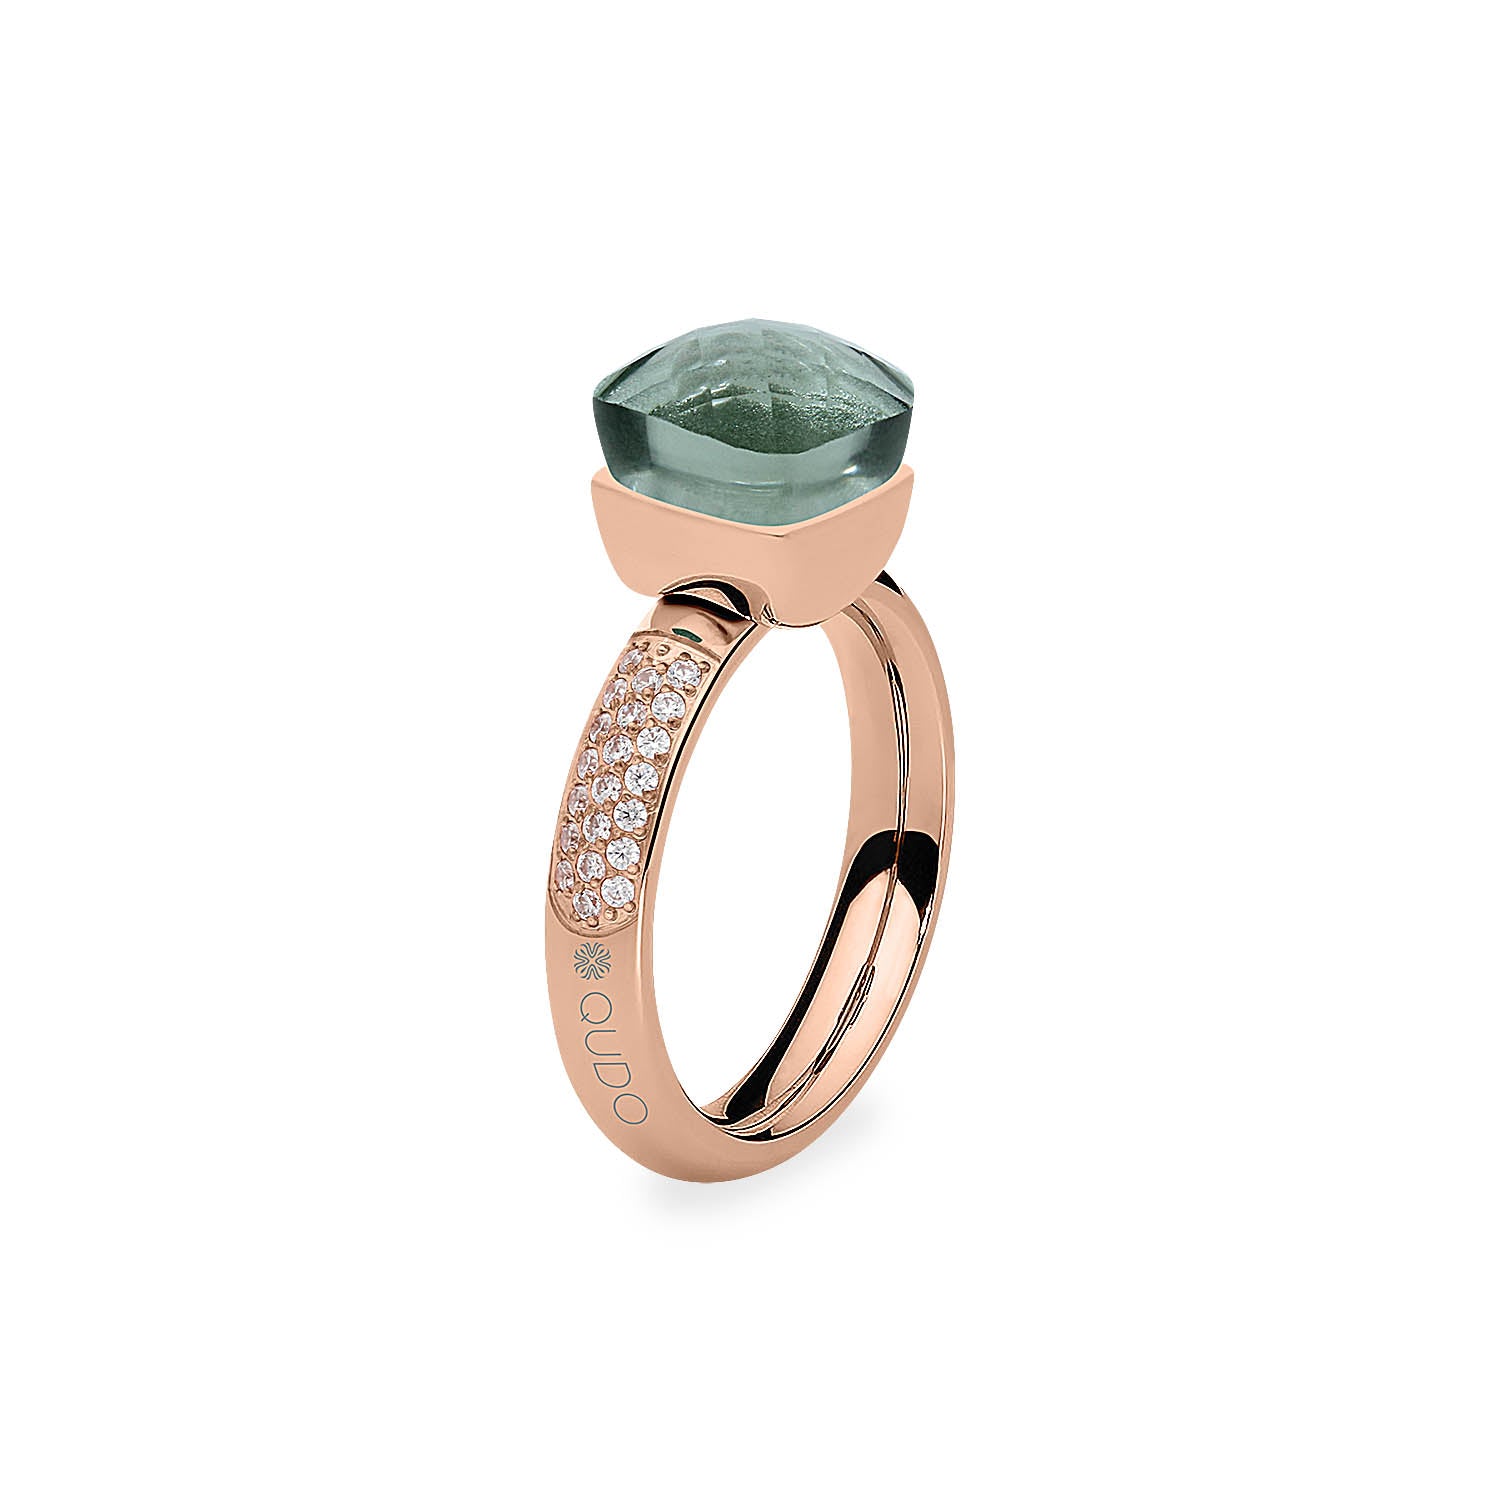 Firenze Deluxe Ring - Shades of Rose & Grey - Rose Gold